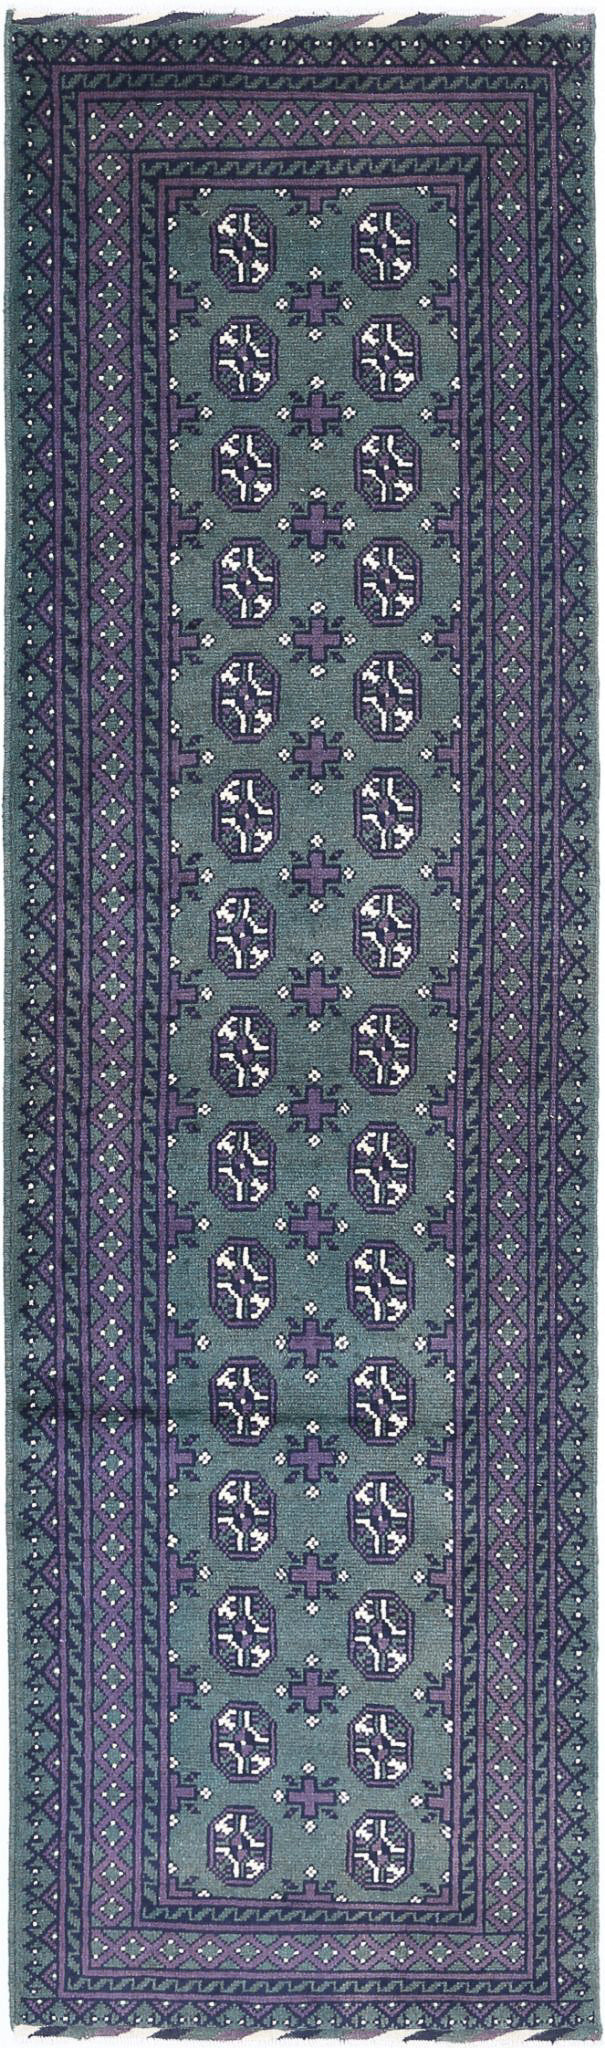 Revival-hand-knotted-gul-collection-wool-rug-5013991.jpg